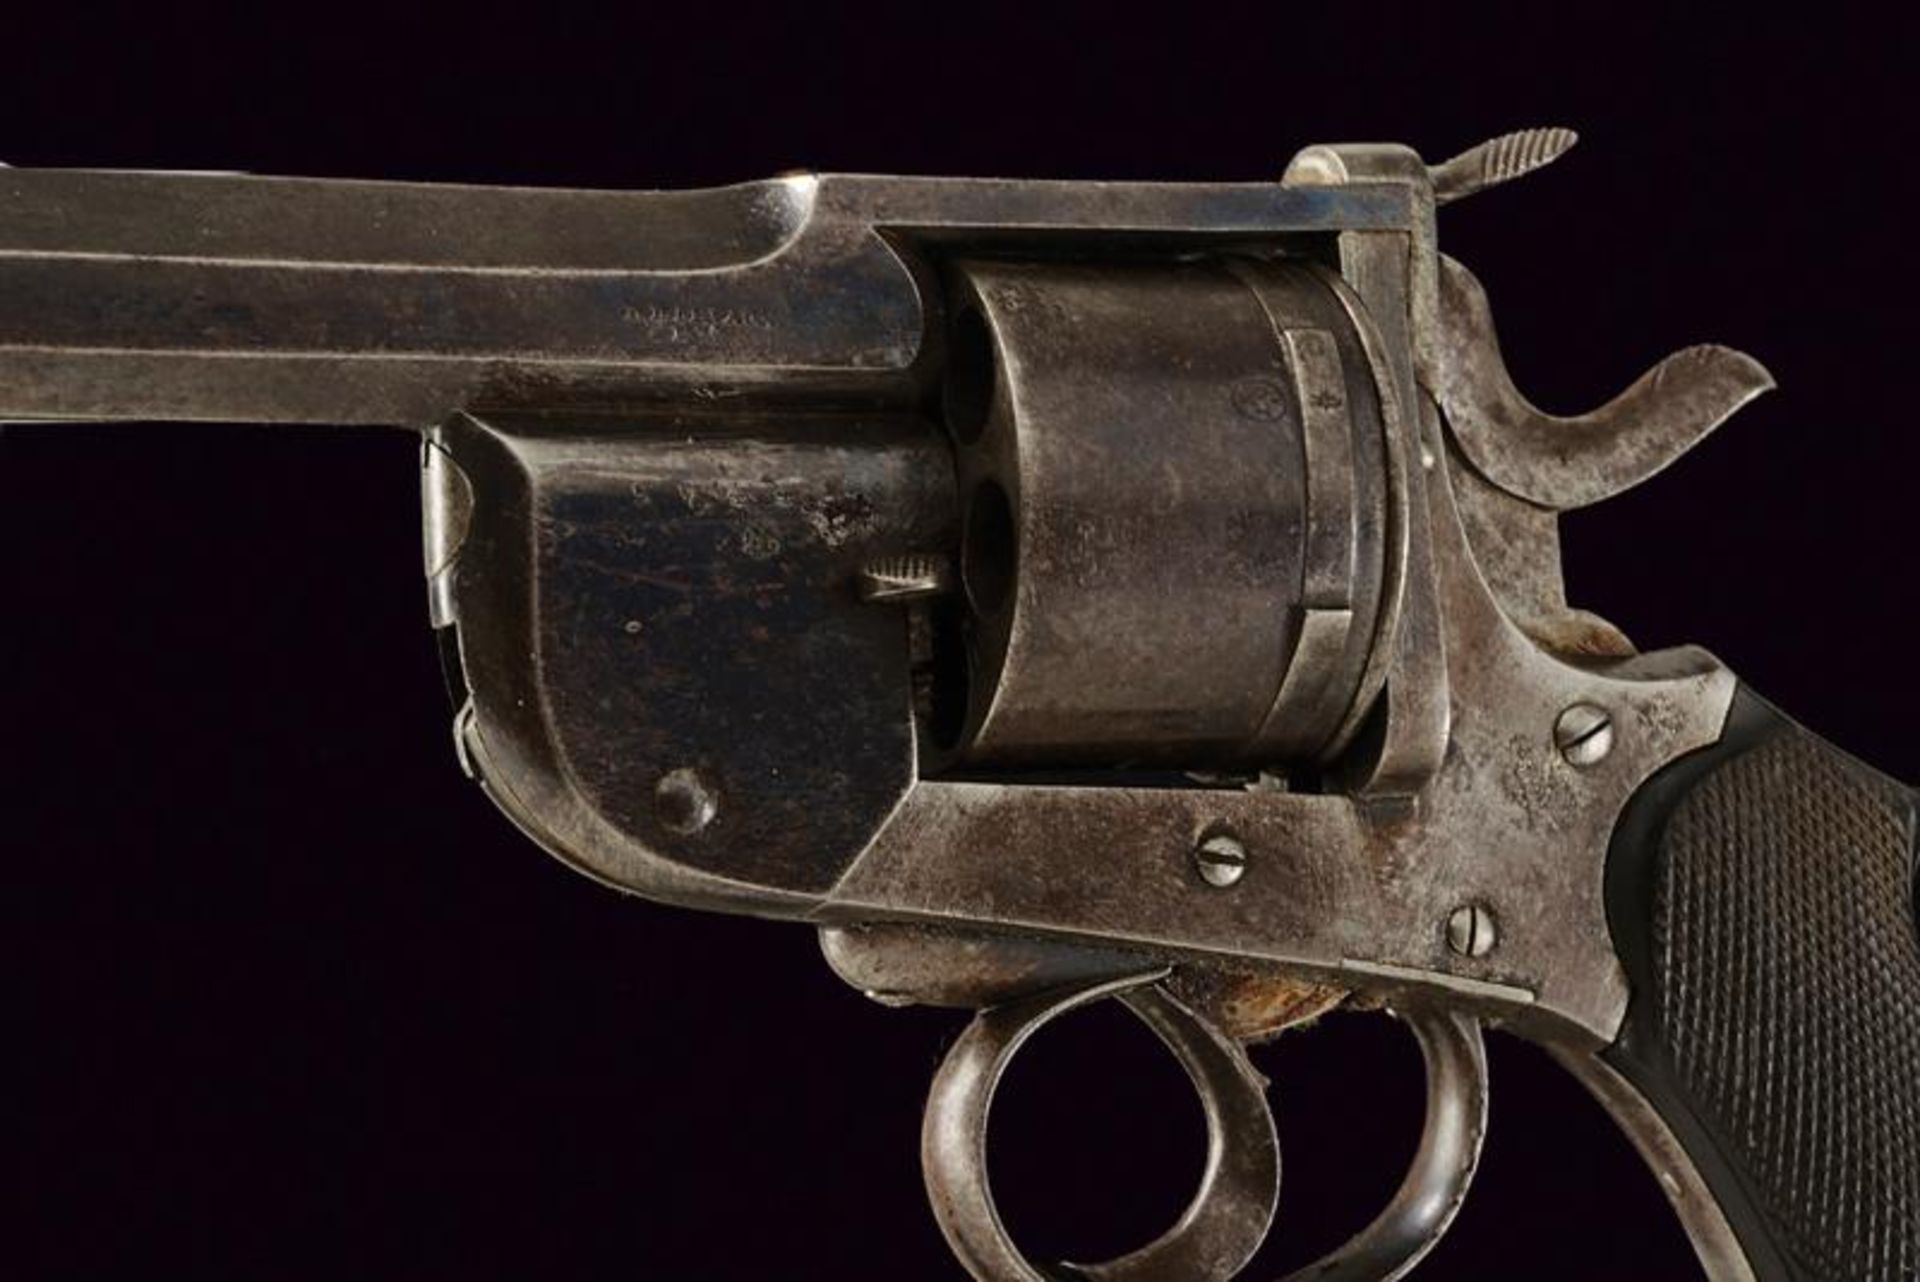 A Levaux center fire revolver - Image 2 of 3